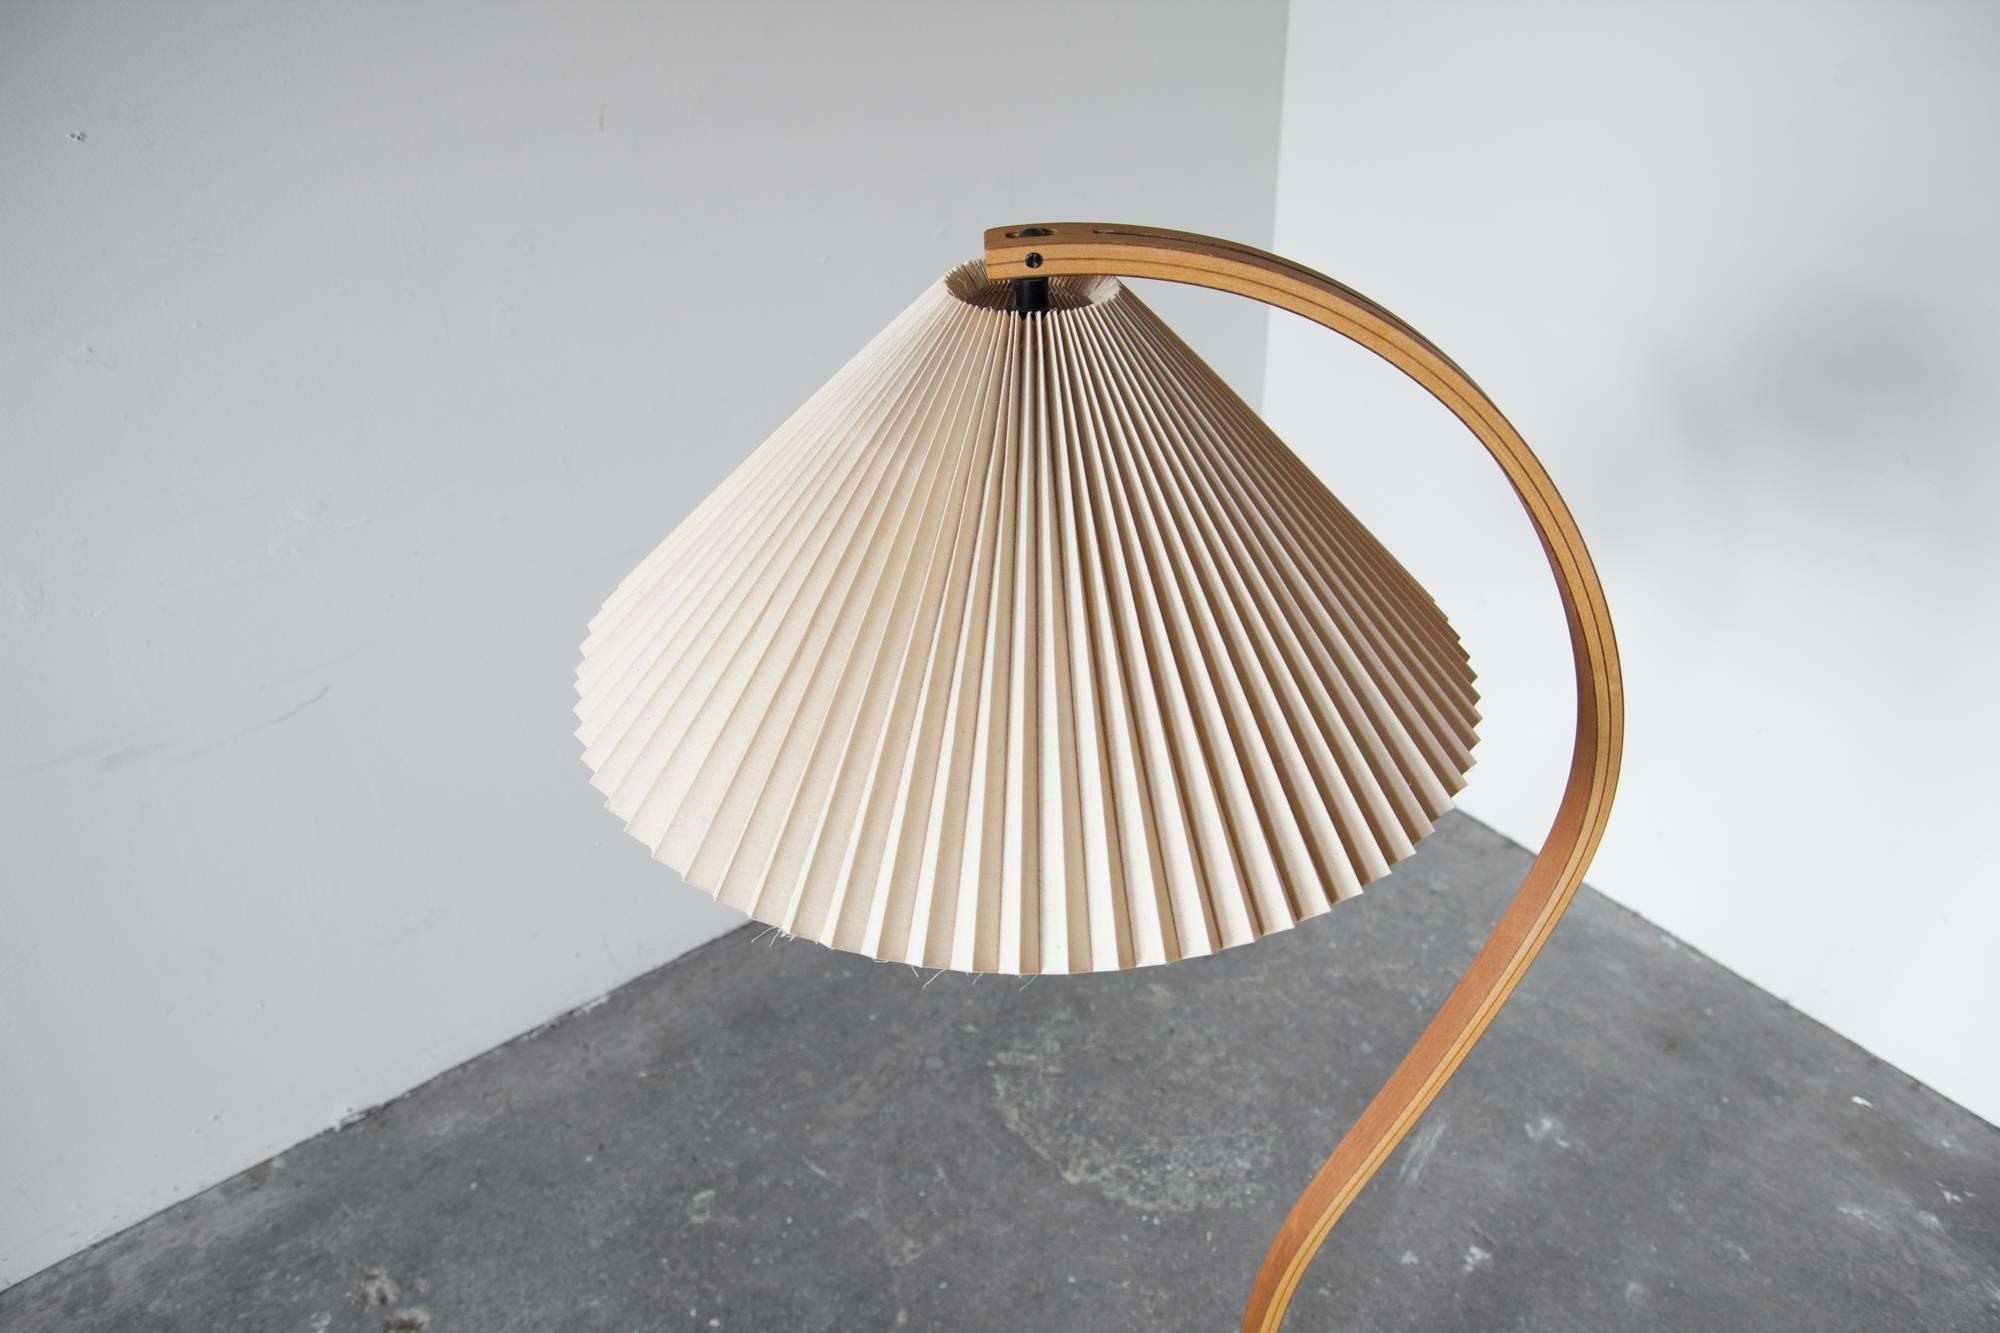 Bentwood floor lamp by Caprani Light AS, with original pleated shade. In it's snaking ascent, the laminated birch frame encompasses the angular shade. On a crescent shaped base of cast iron.